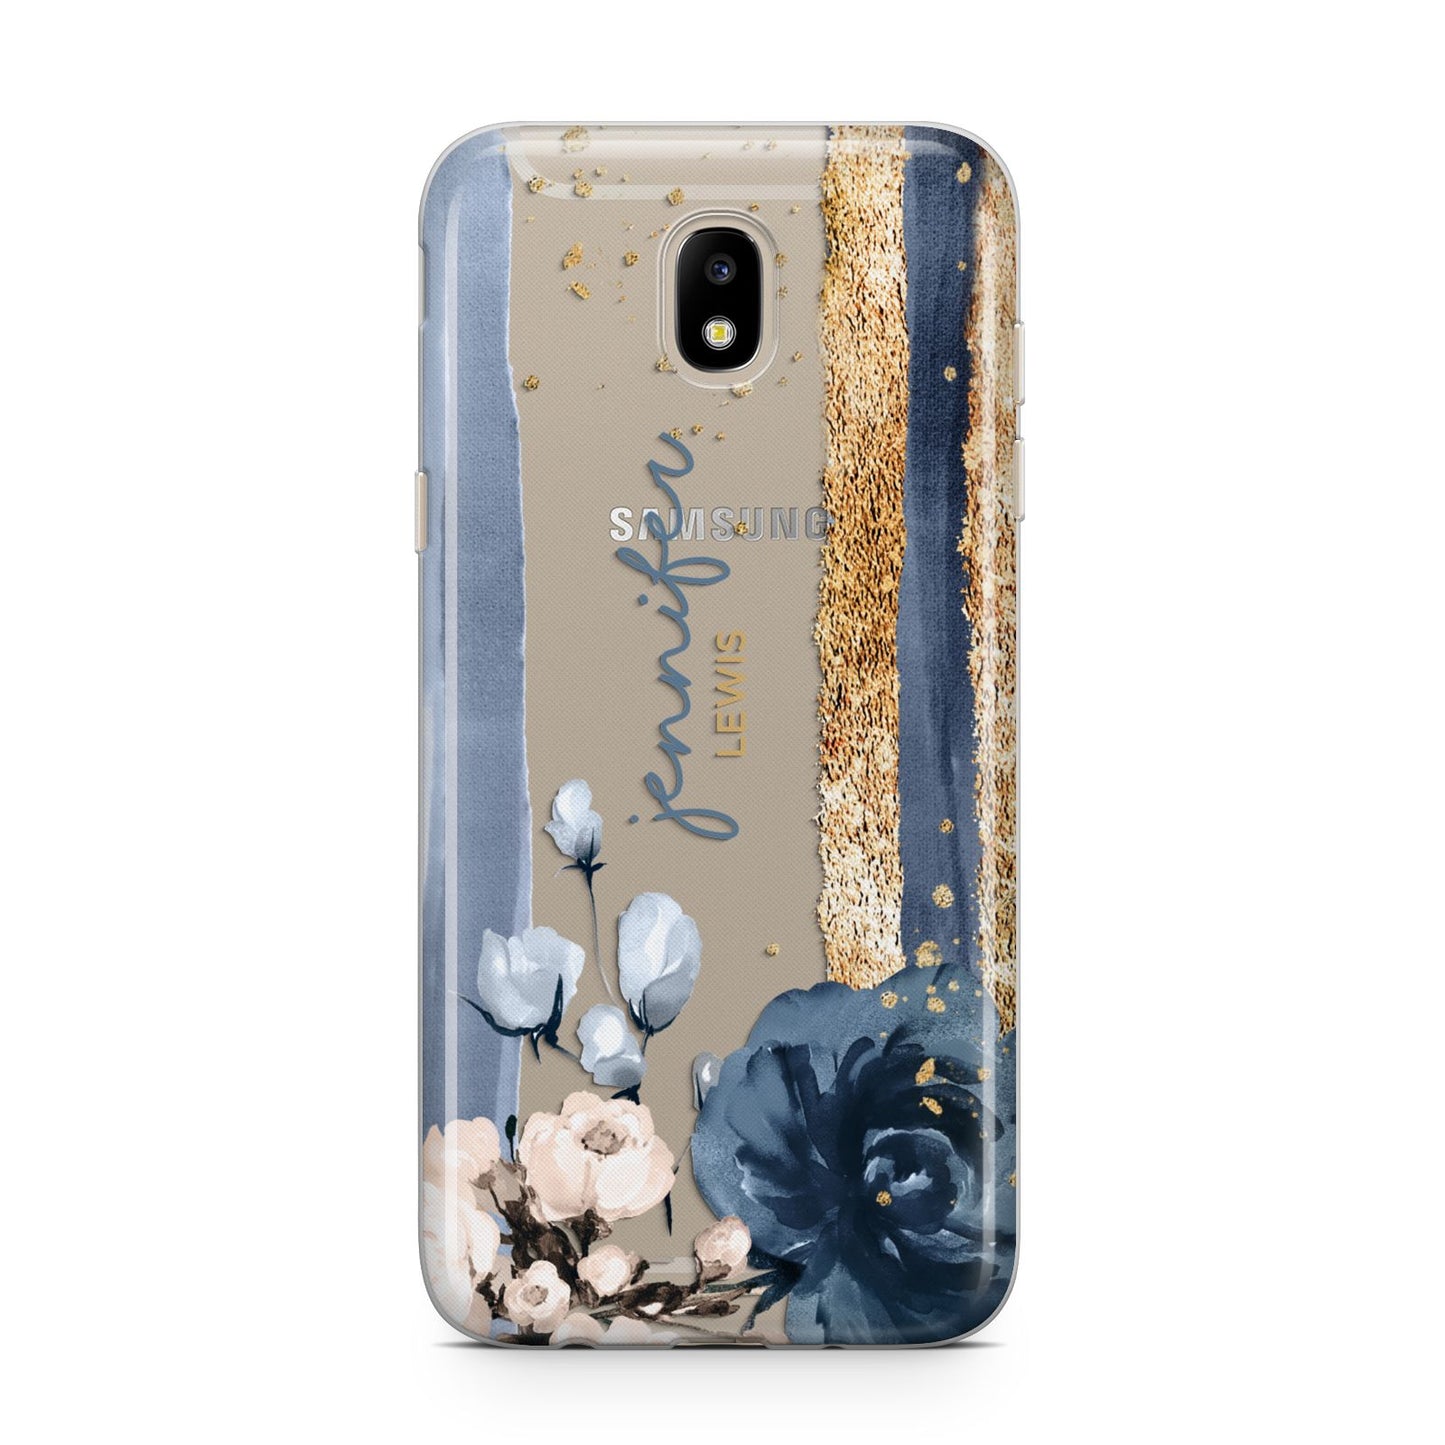 Personalised Blue Gold Name Samsung J5 2017 Case